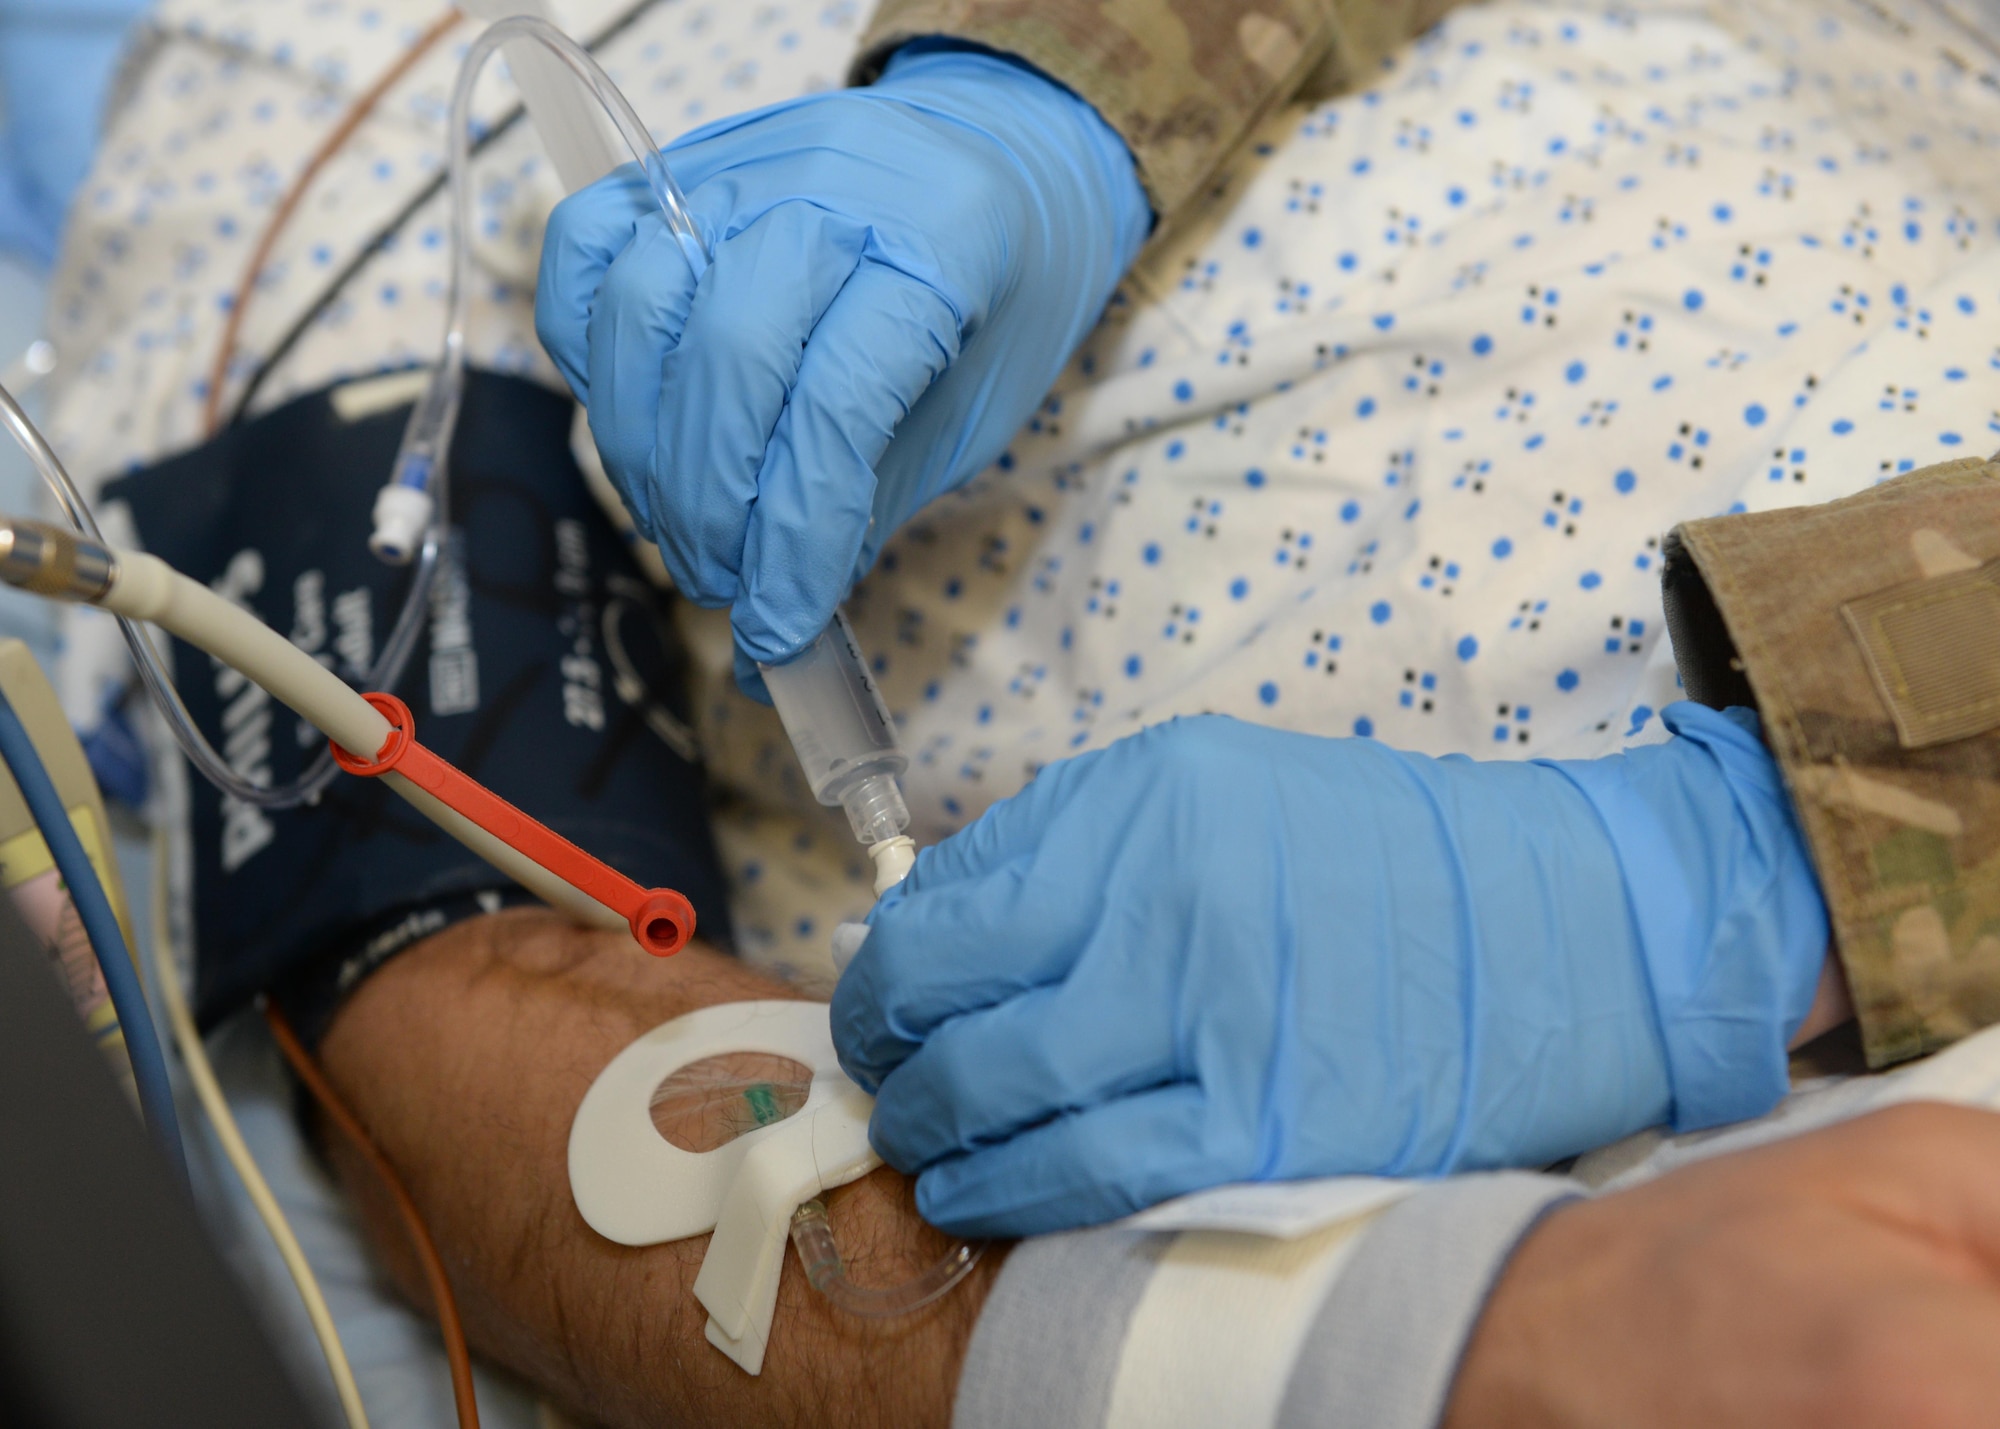 U.S. Air Force Capt. Mavis Bean, 455th Expeditionary Medical Operations Squadron clinical nurse, simulates placing I.V. fluids in a volunteer training patients arm June 11, 2015, at Bagram Airfield, Afghanistan. Bean works in the intensive care unit at Afghanistan’s most advanced medical facility, the Craig Joint Theater Hospital, and is responsible for treating trauma patients. (U.S. Air Force photo by Senior Airmen Cierra Presentado/Released)